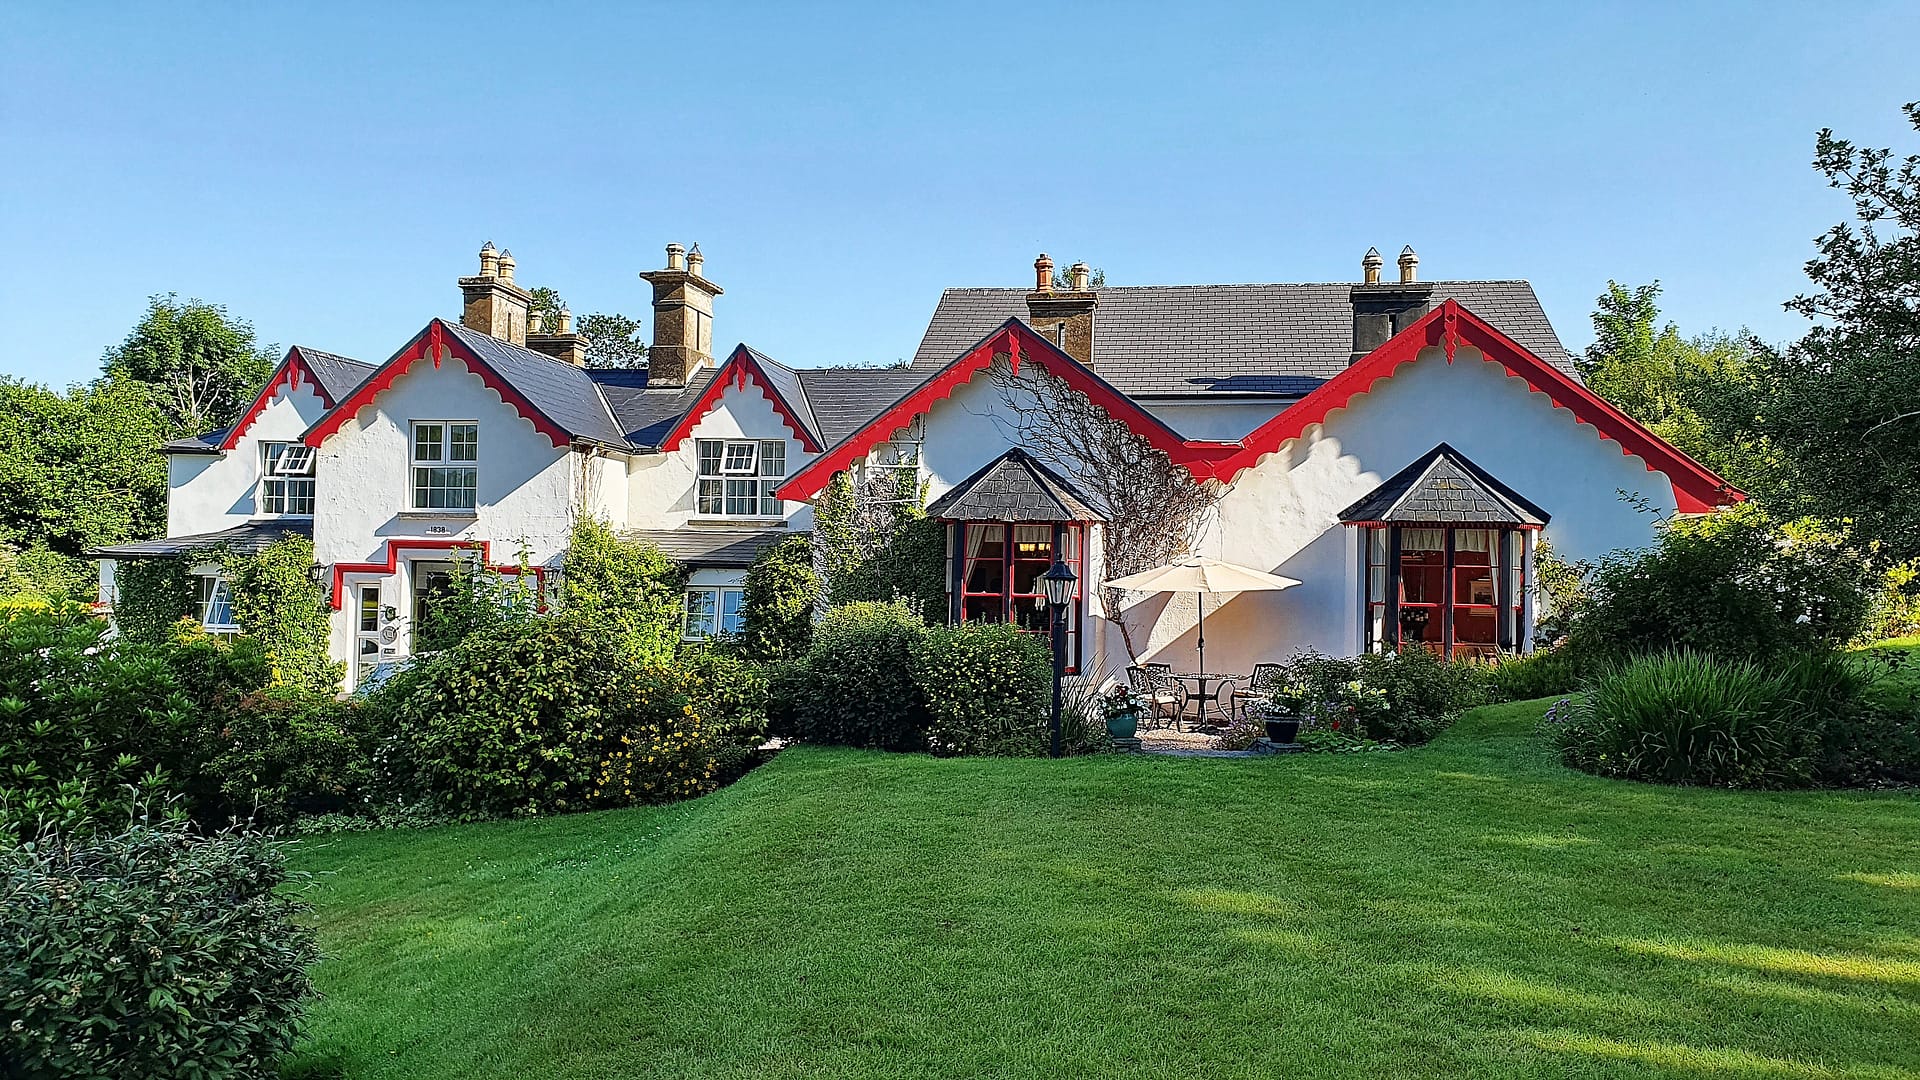 The Killeen House Hotel and Rozzers Restaurant are located near Killarney in County Kerry, Ireland.